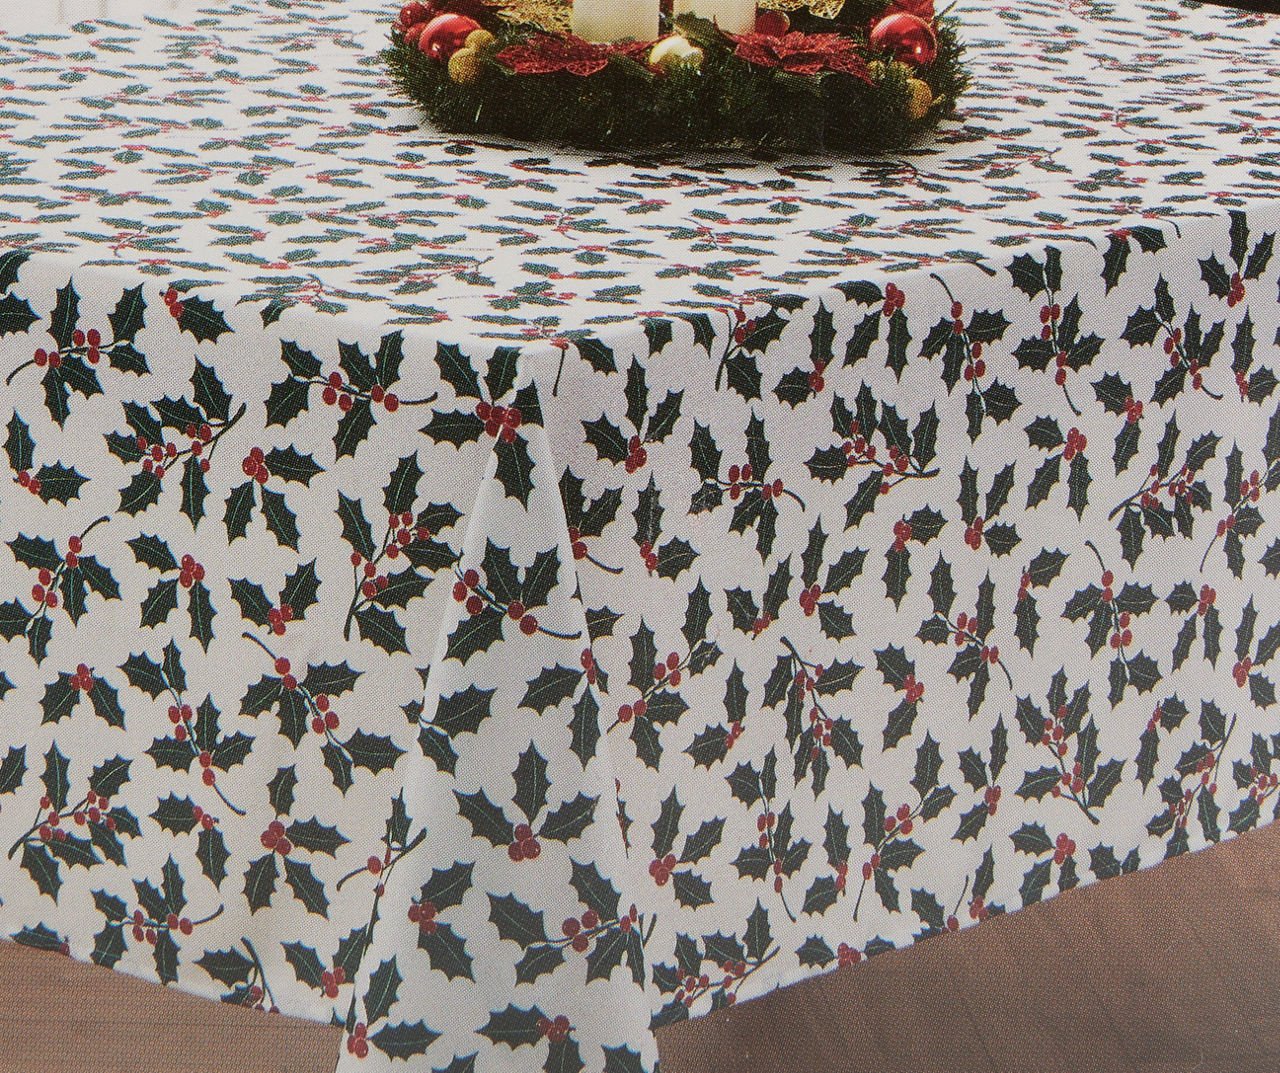 Santa's Workshop White & Green Holly Fabric Tablecloth, (60" x 84")